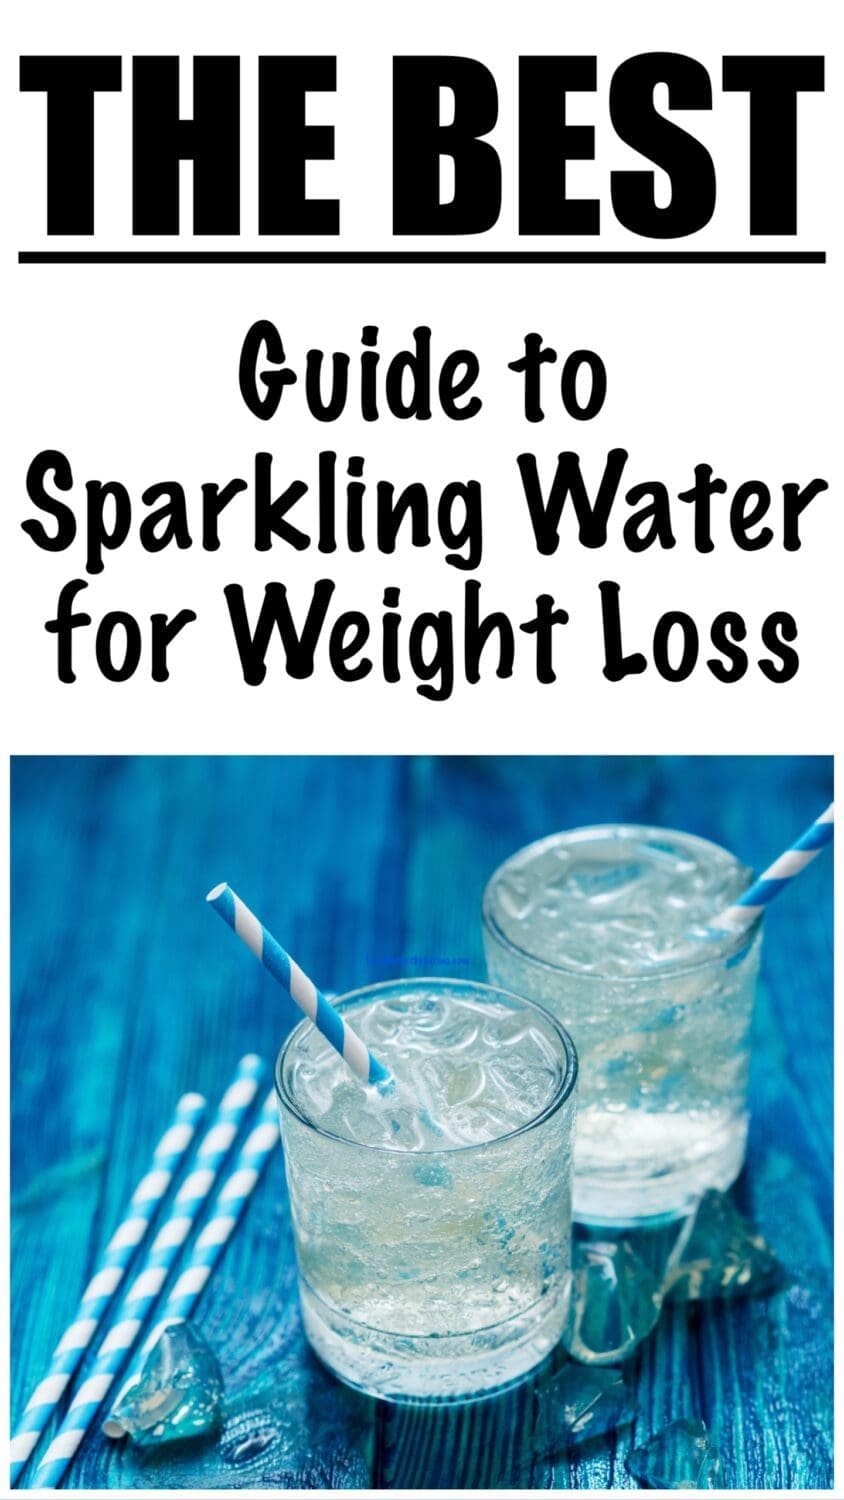 Is Sparkling Water Good for Weight Loss?